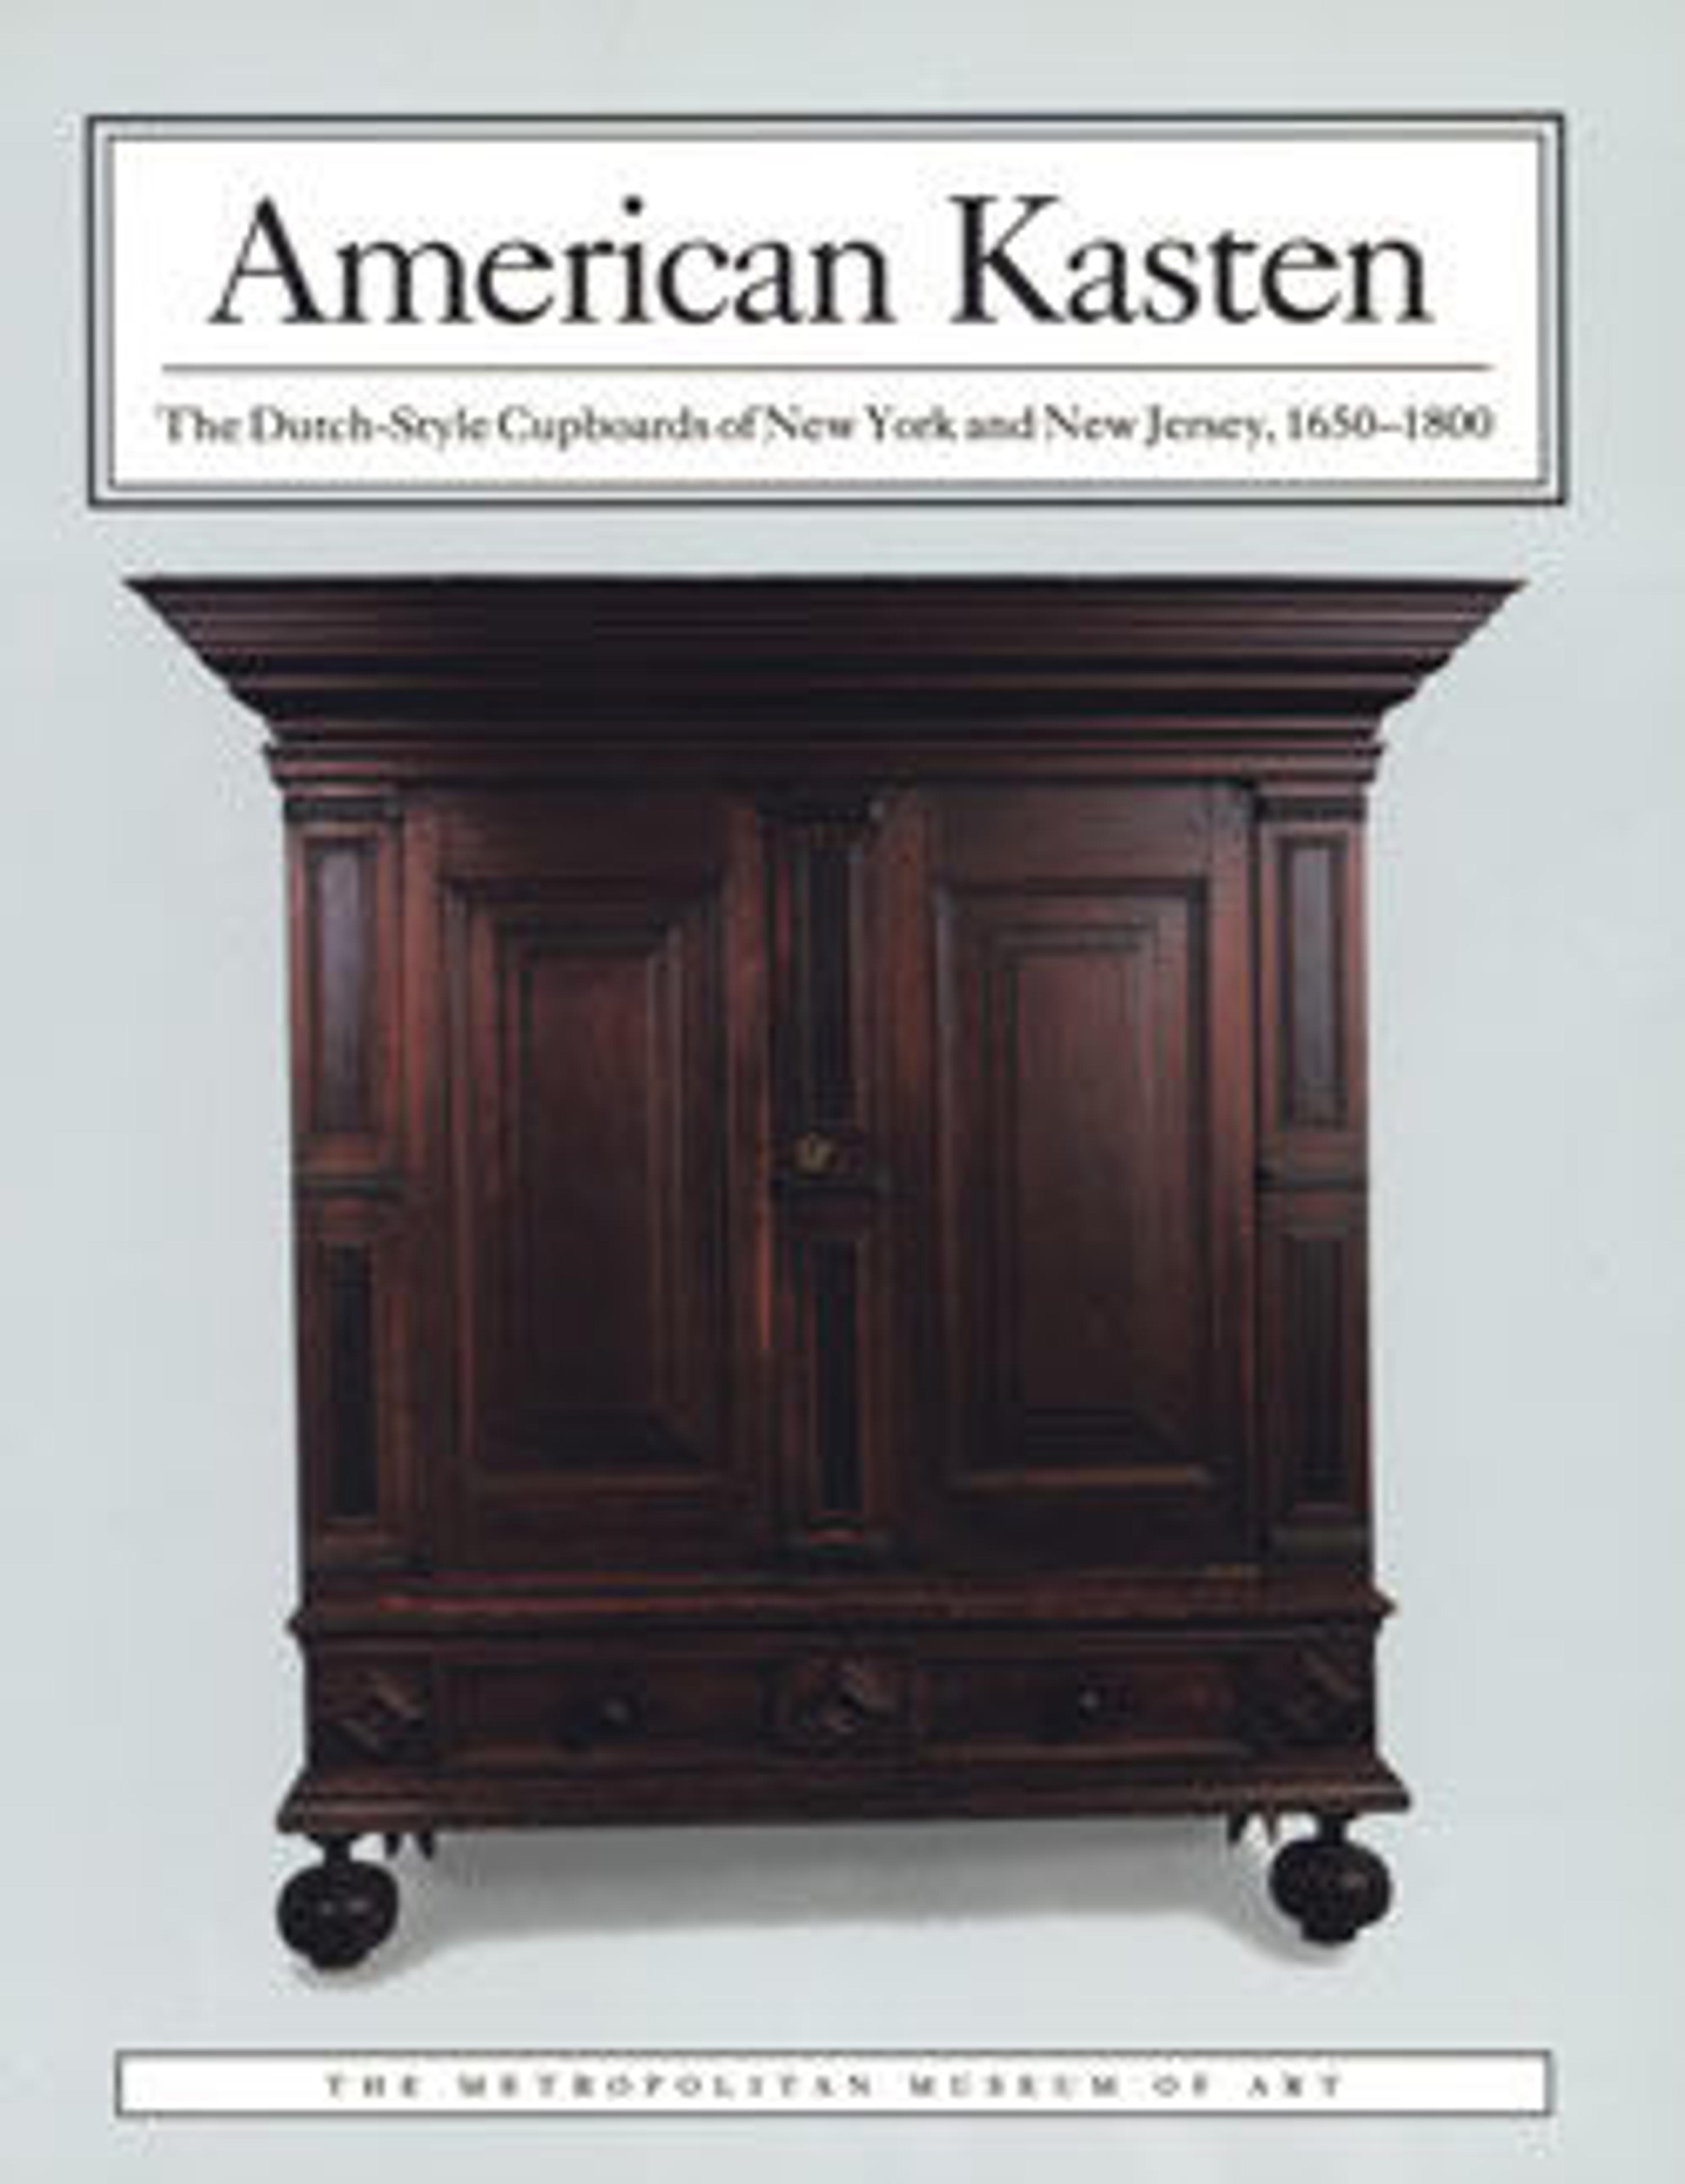 American Kasten: The Dutch-Style Cupboards of New York and New Jersey, 1650-1800